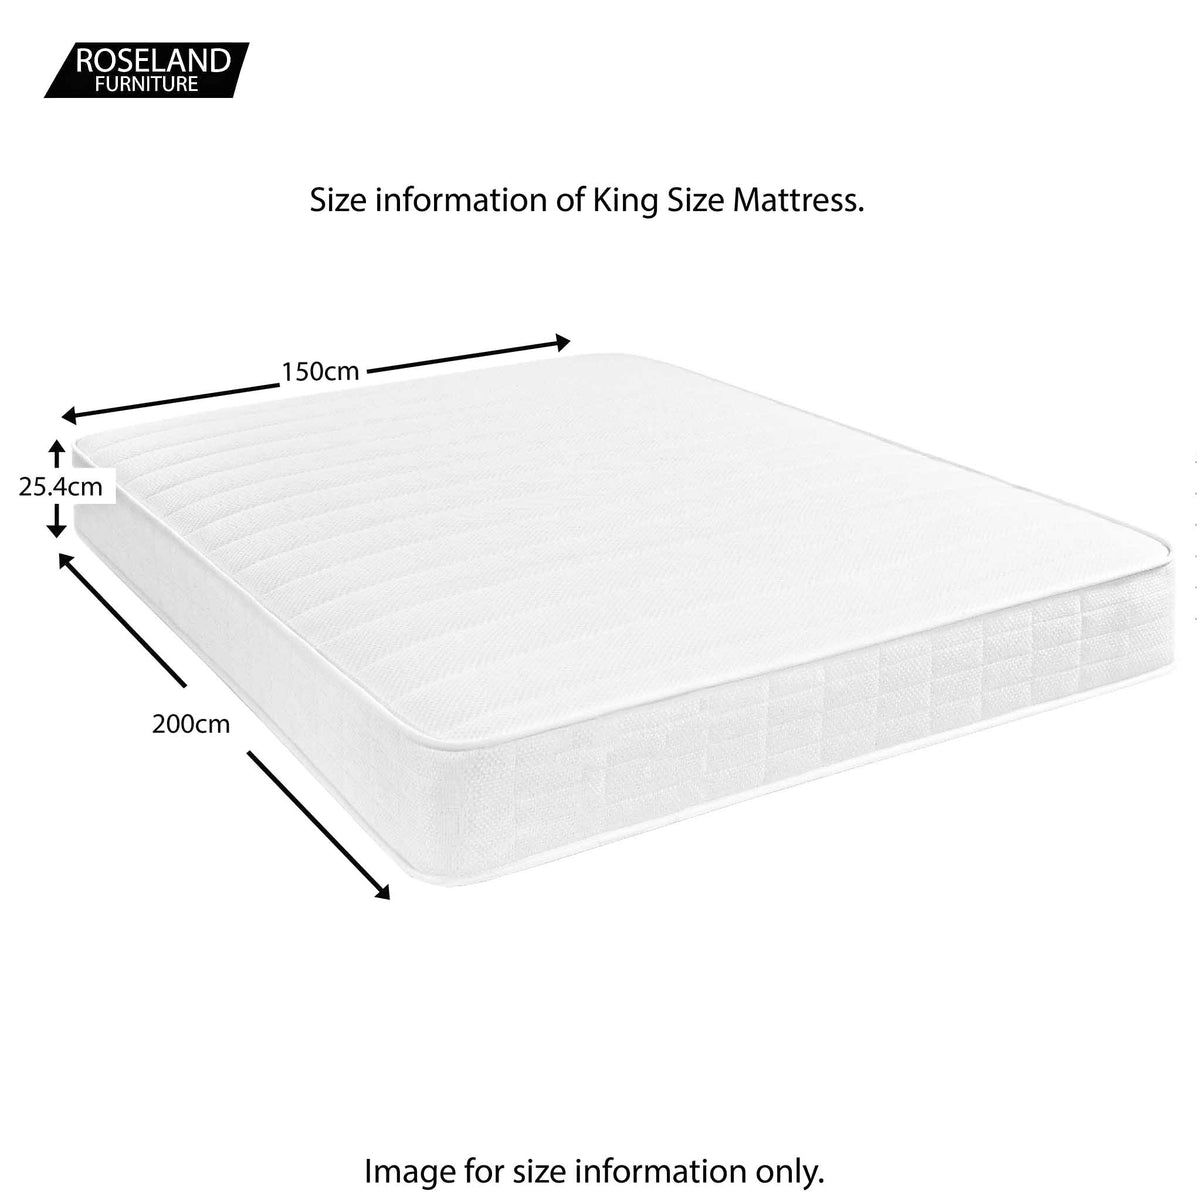 Roseland Sleep Tempest - King Size,  Size Guide